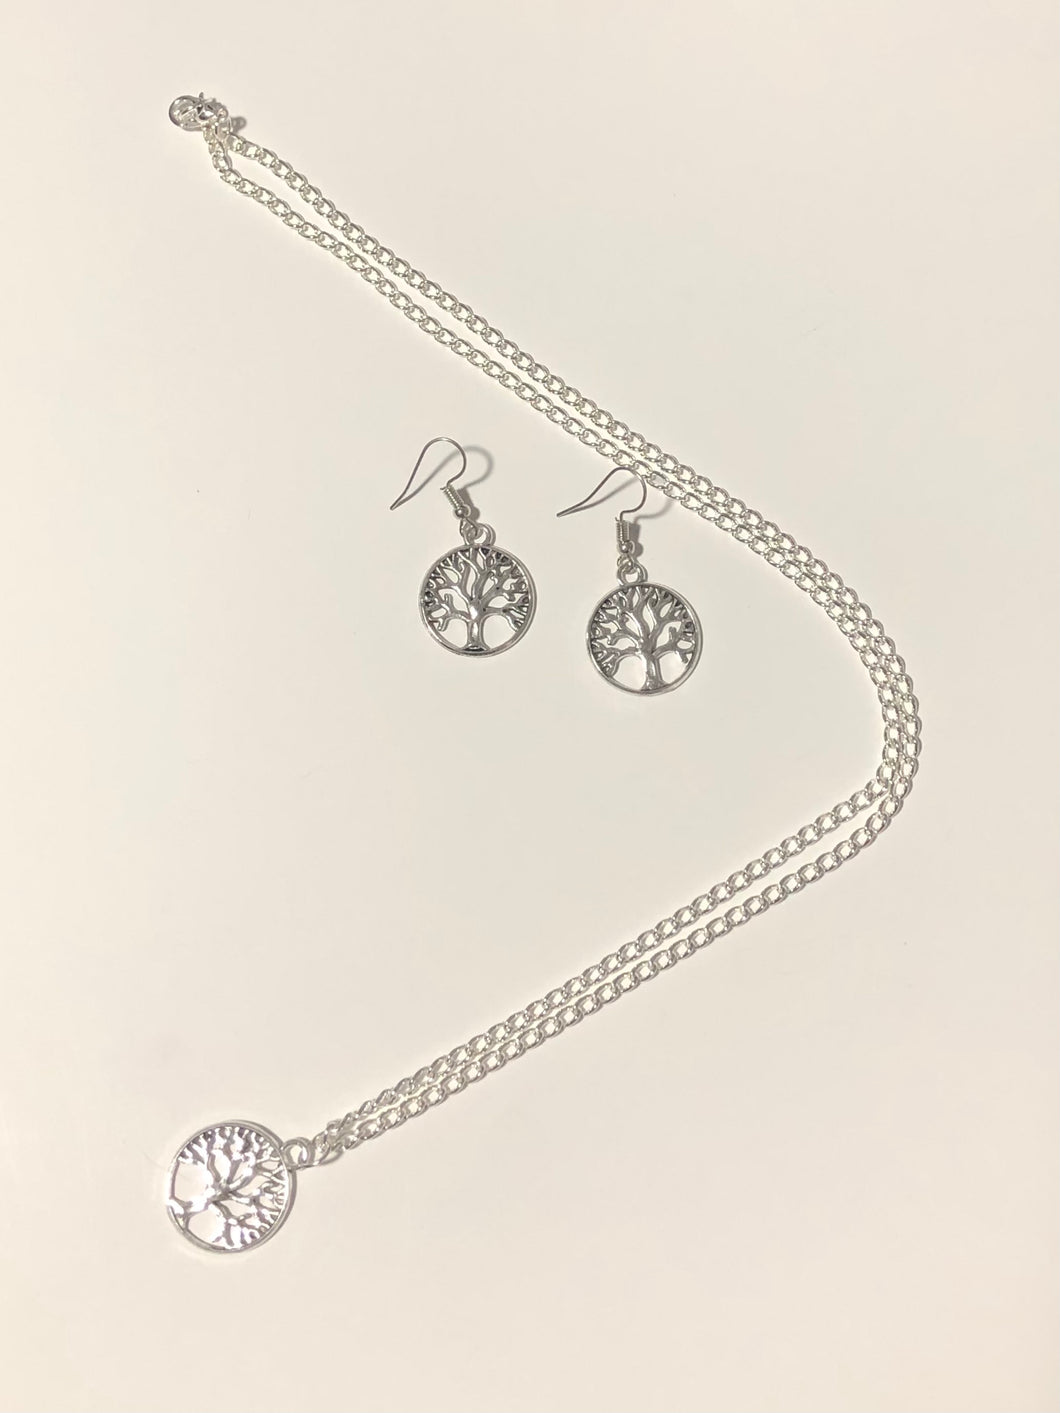 Silver tree of life necklace and earring set